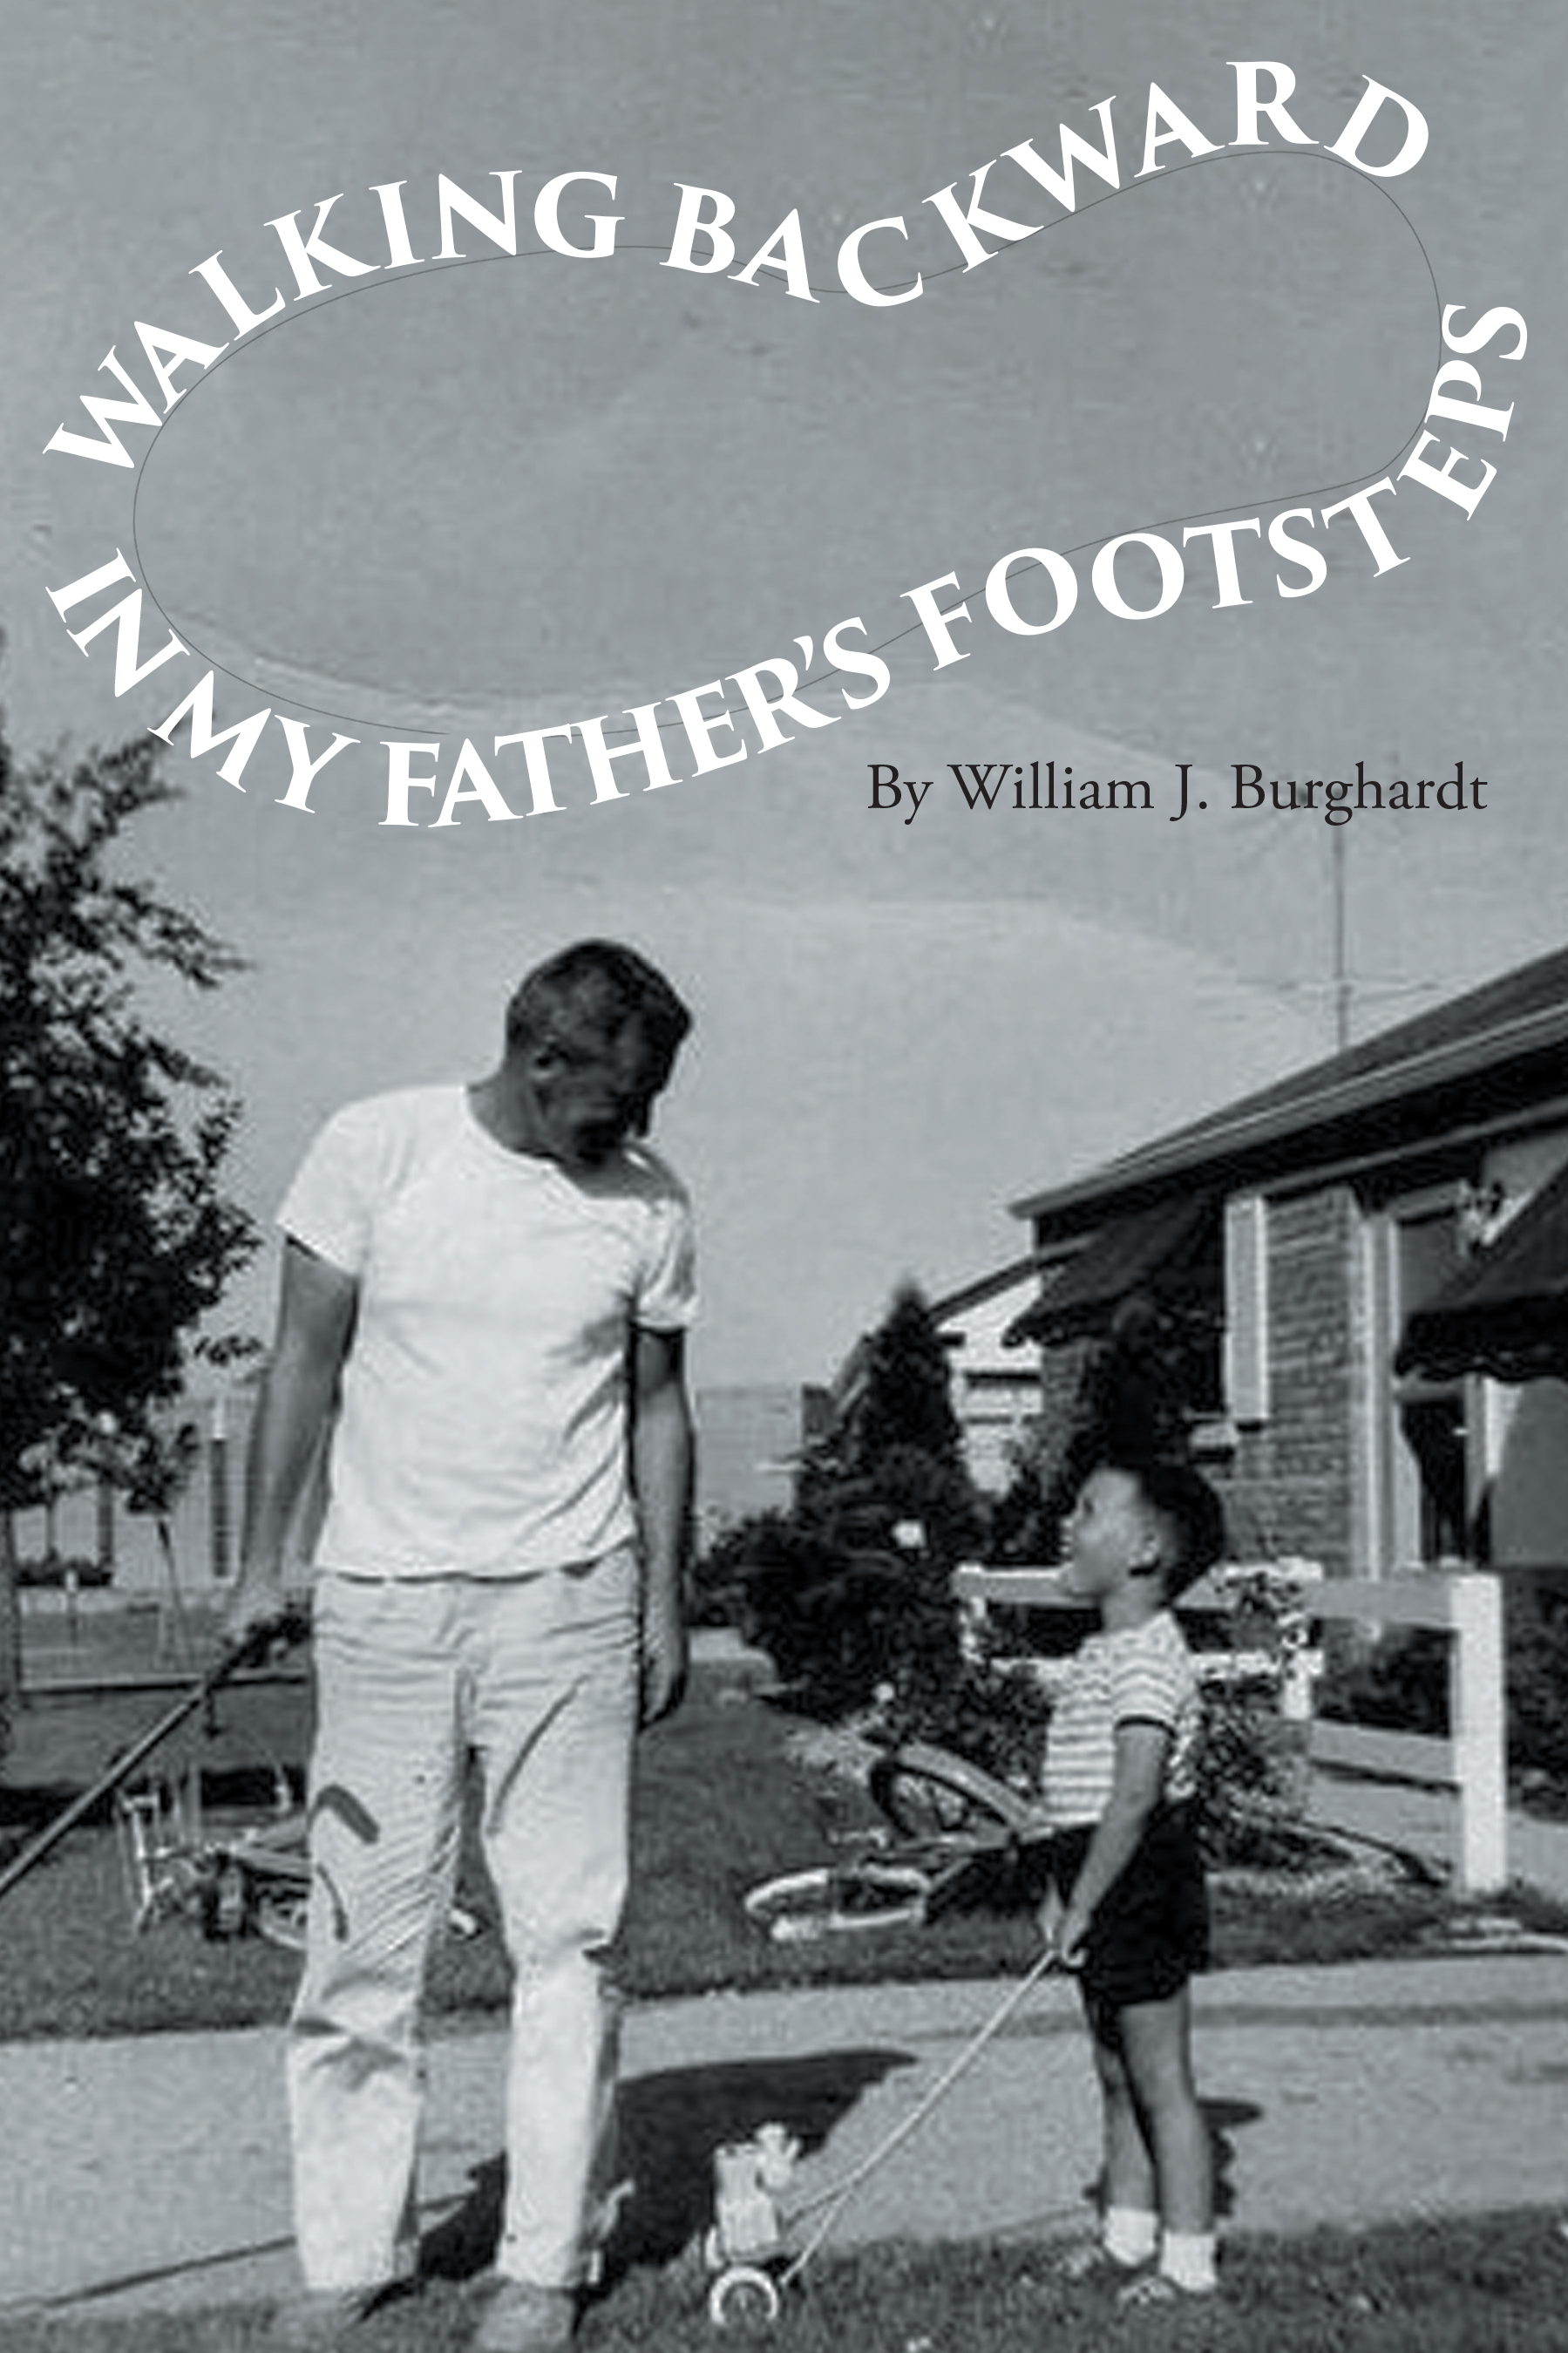 Author William Burghardt’s New Book, "Walking Backward in My Father’s Footsteps," is the Captivating True Story of the Author’s Father’s Military Career